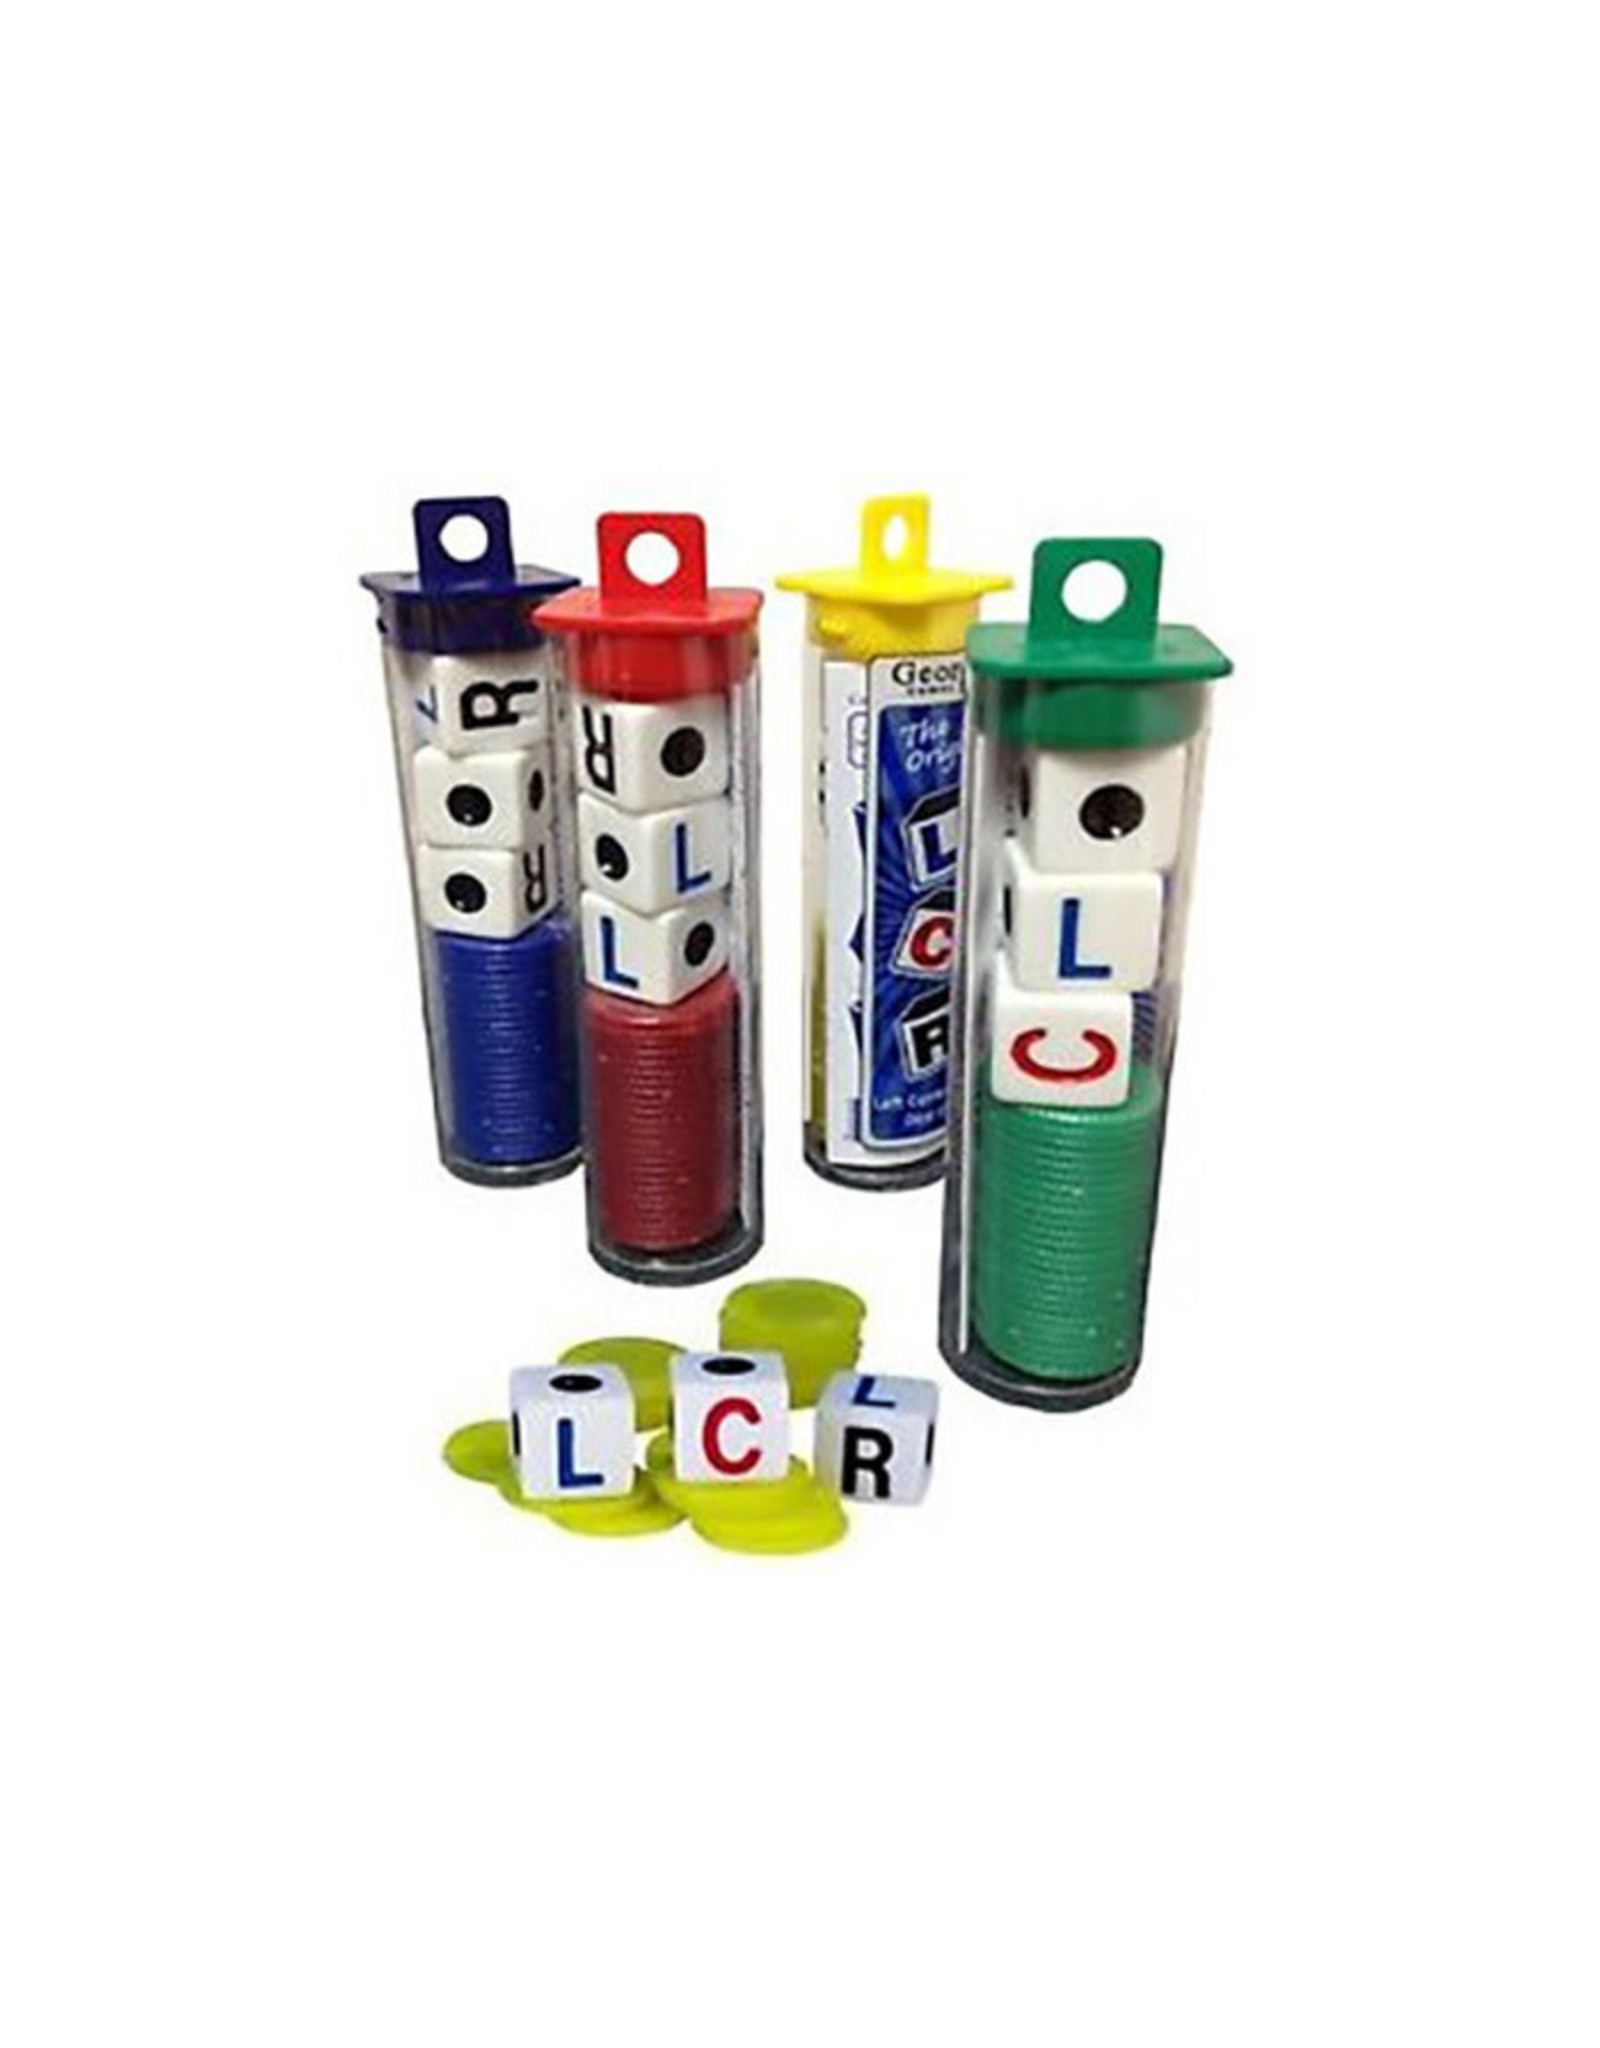 Koplow Left Center Right Tube (LCR)